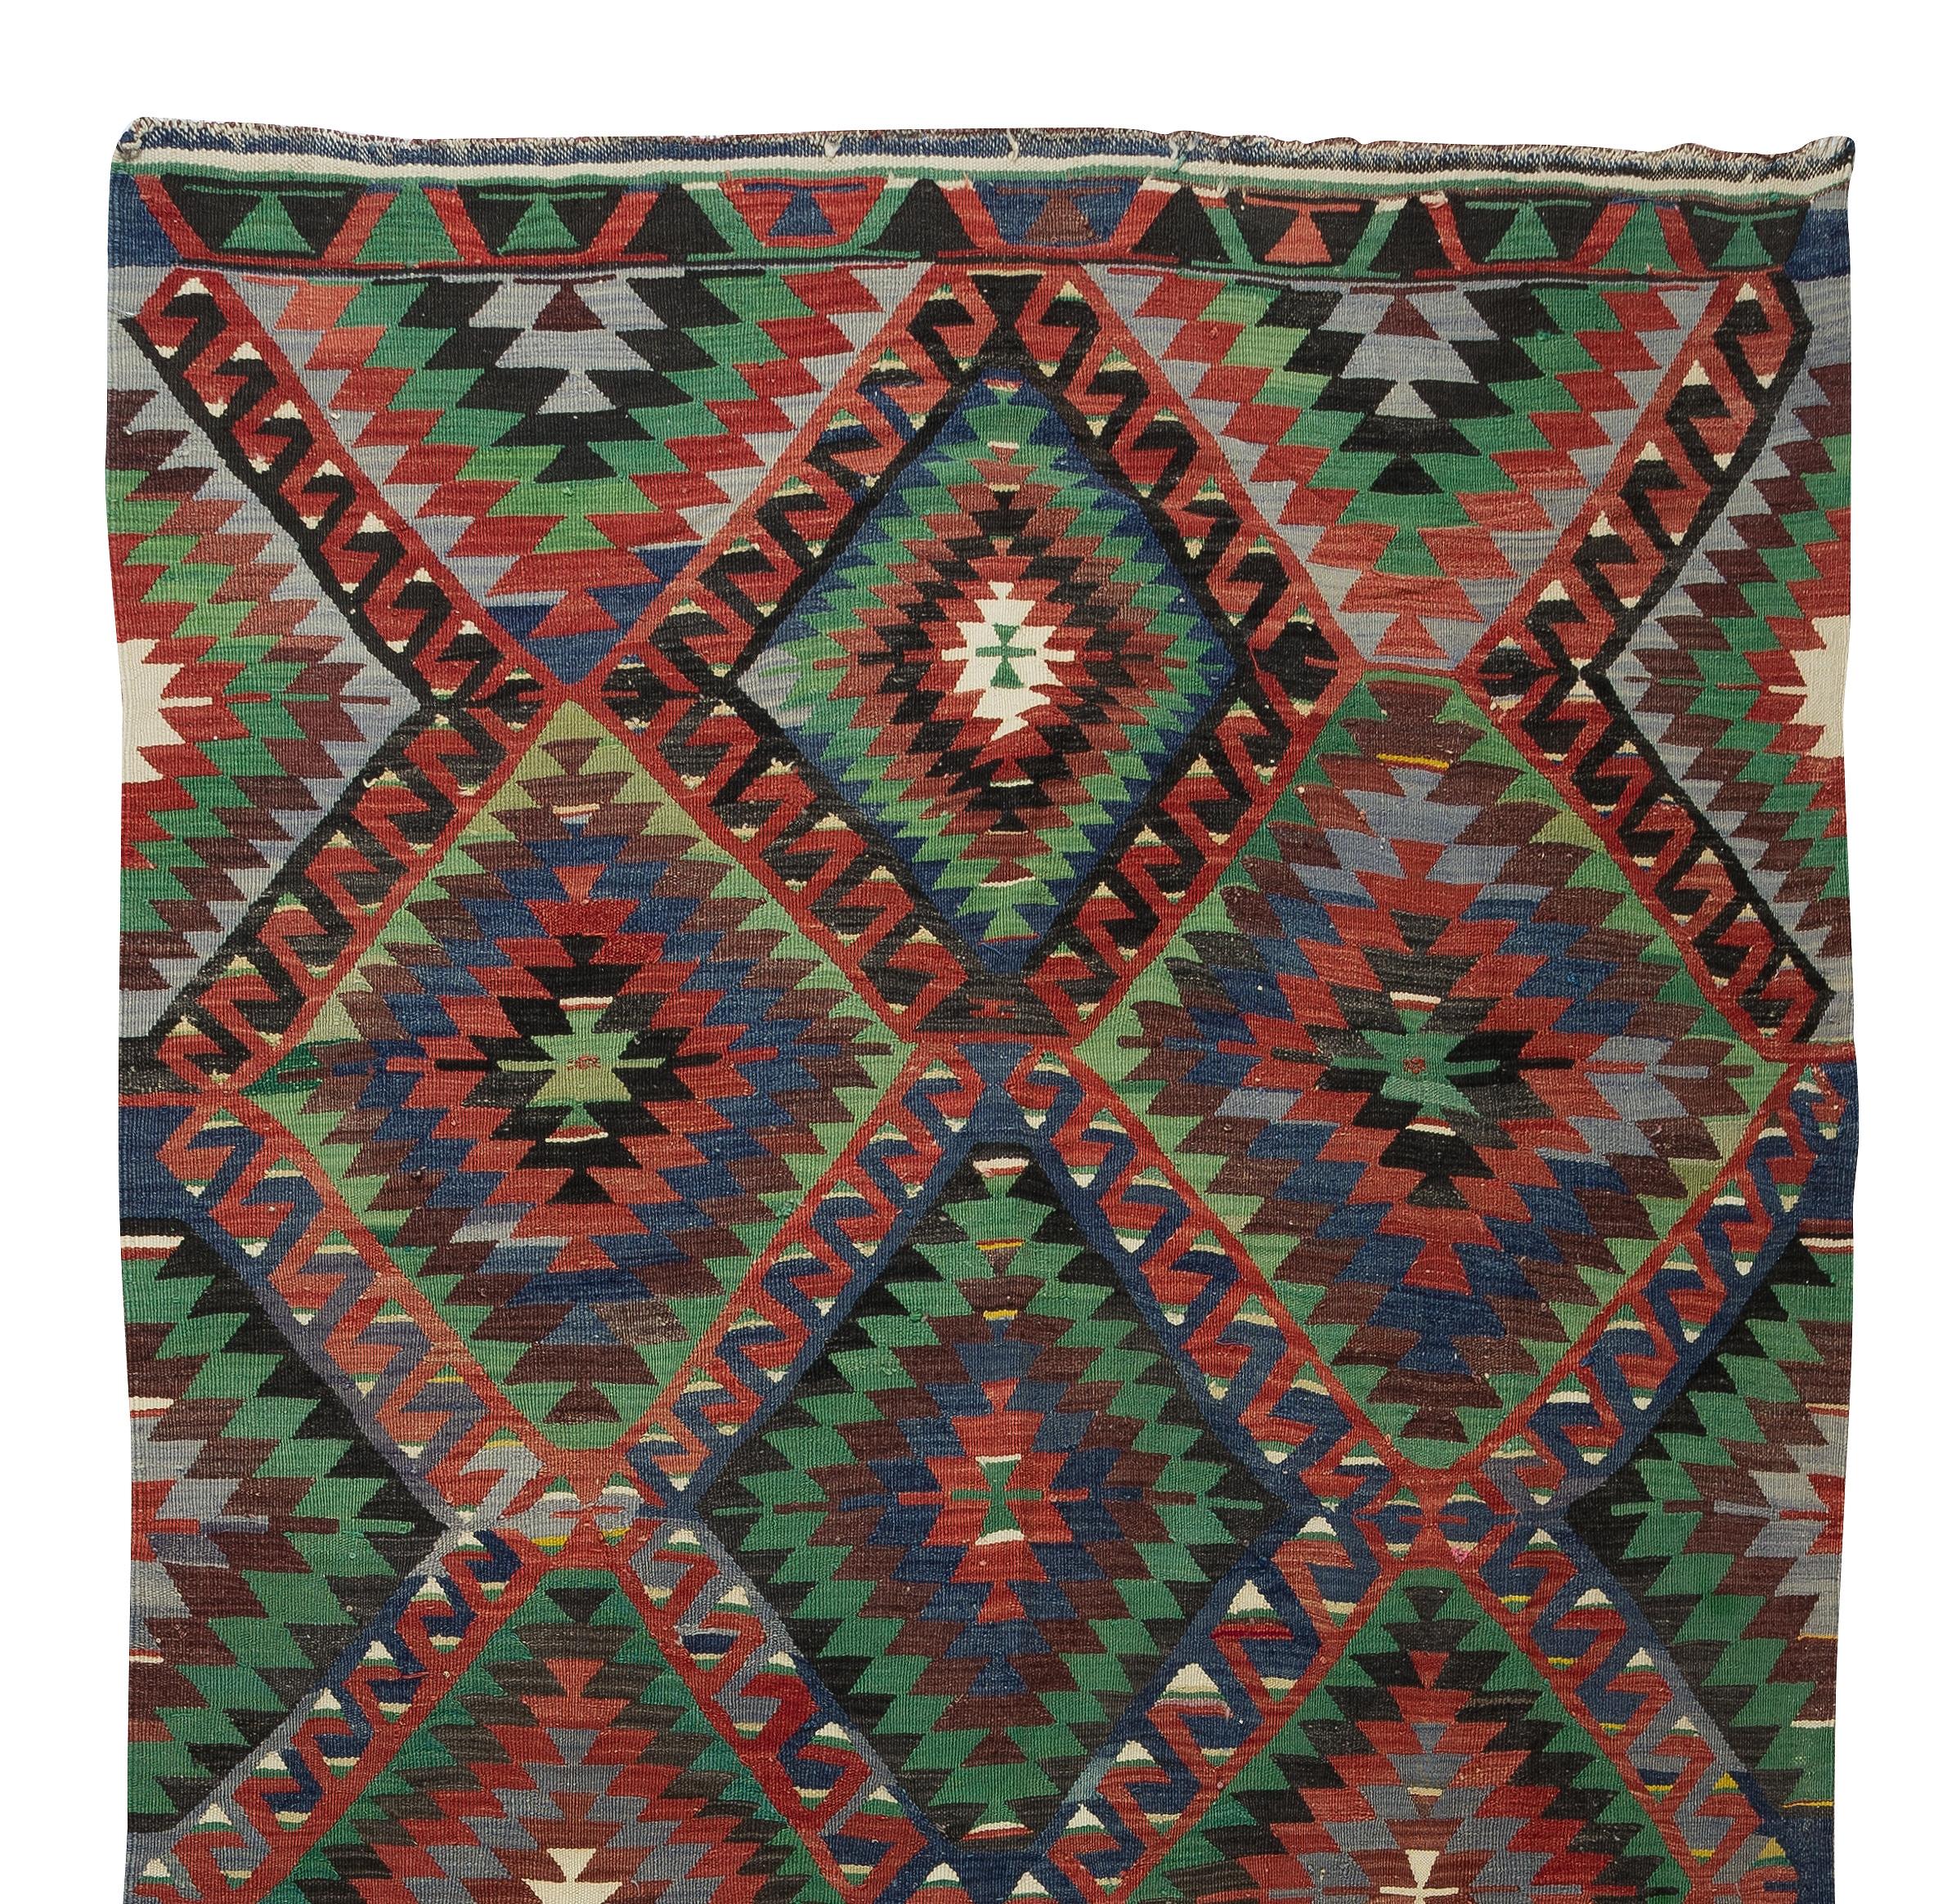 5.7x10.8 Ft Handmade Turkish Kilim, Vintage Flat-Weave Rug, Colorful Wool Carpet In Good Condition For Sale In Philadelphia, PA